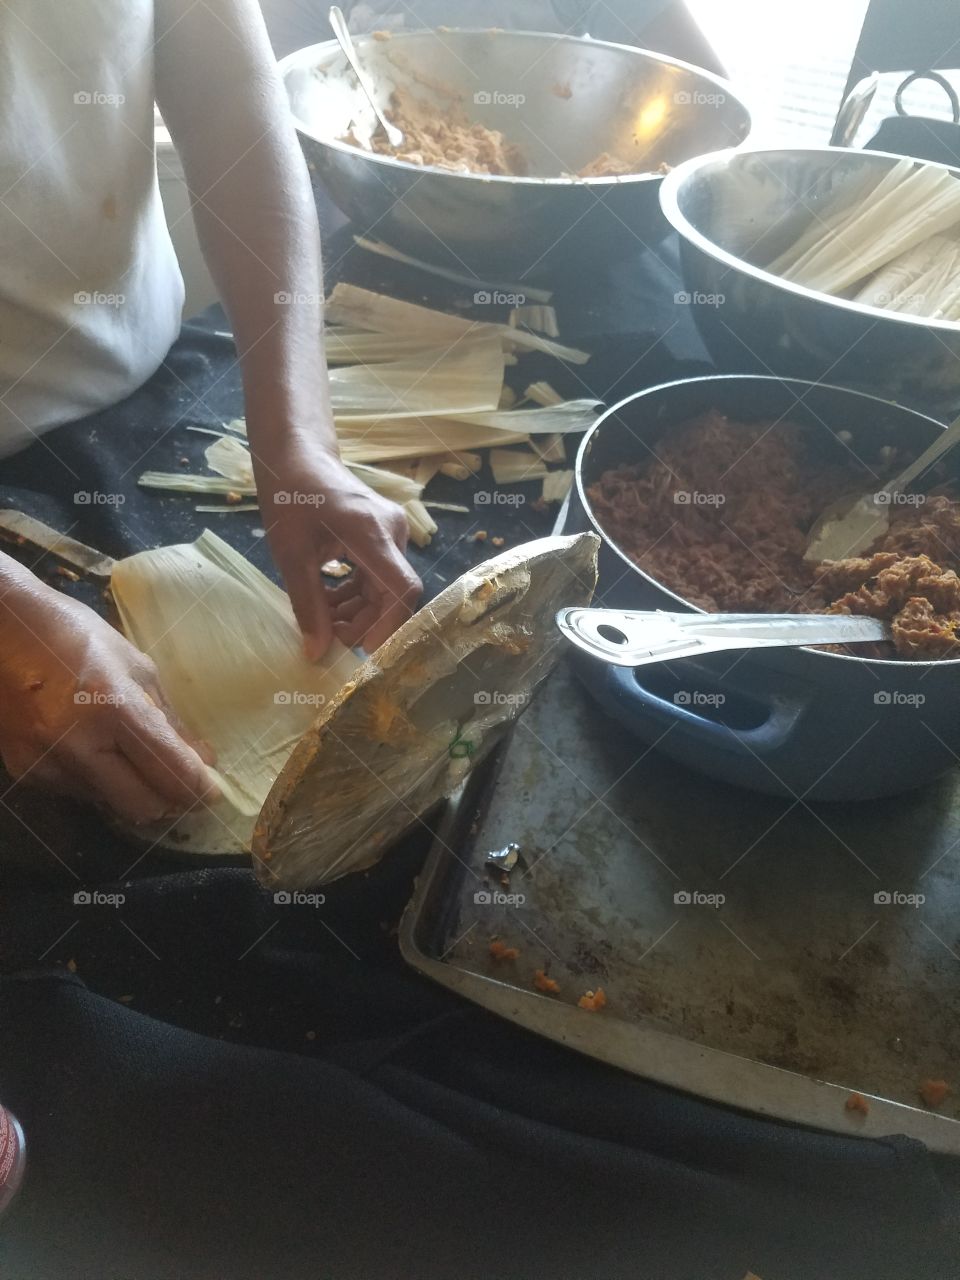 making tamales by hand